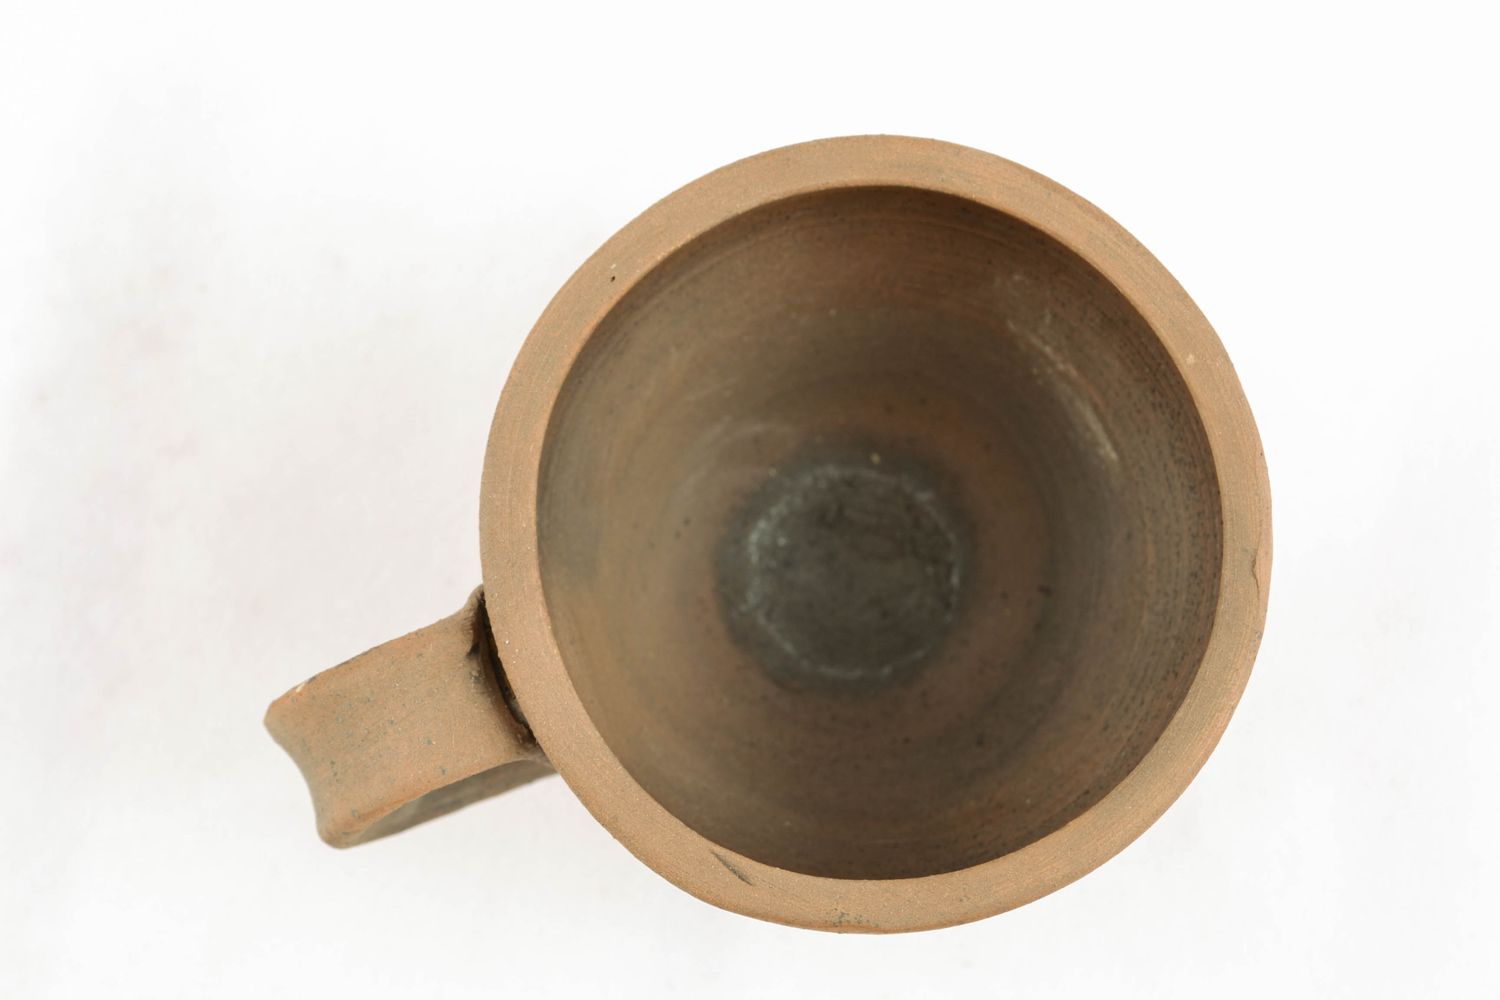 Natural 2 oz clay espresso coffee cup with handle and rustic design photo 5